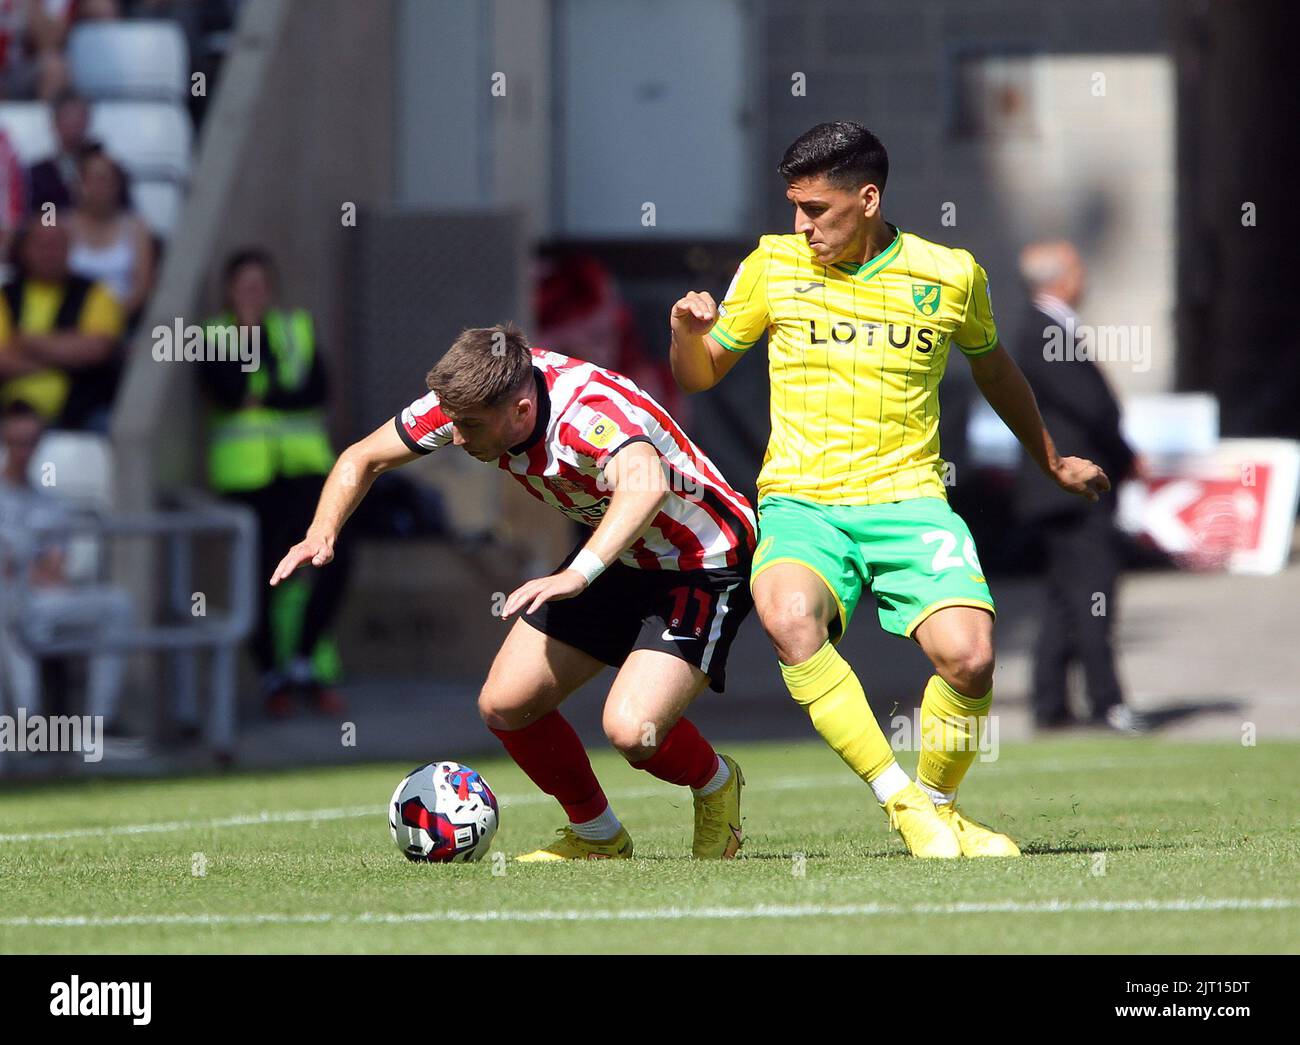 Sunderland, UK. 27th Aug, 2022. Lynden Gooch of Sunderland goes down under pressure from Marcelino Nunez of Norwich City during the Sky Bet Championship match between Sunderland and Norwich City at Stadium of Light on August 27th 2022 in Sunderland, England. (Photo by Mick Kearns/phcimages.com) Credit: PHC Images/Alamy Live News Stock Photo